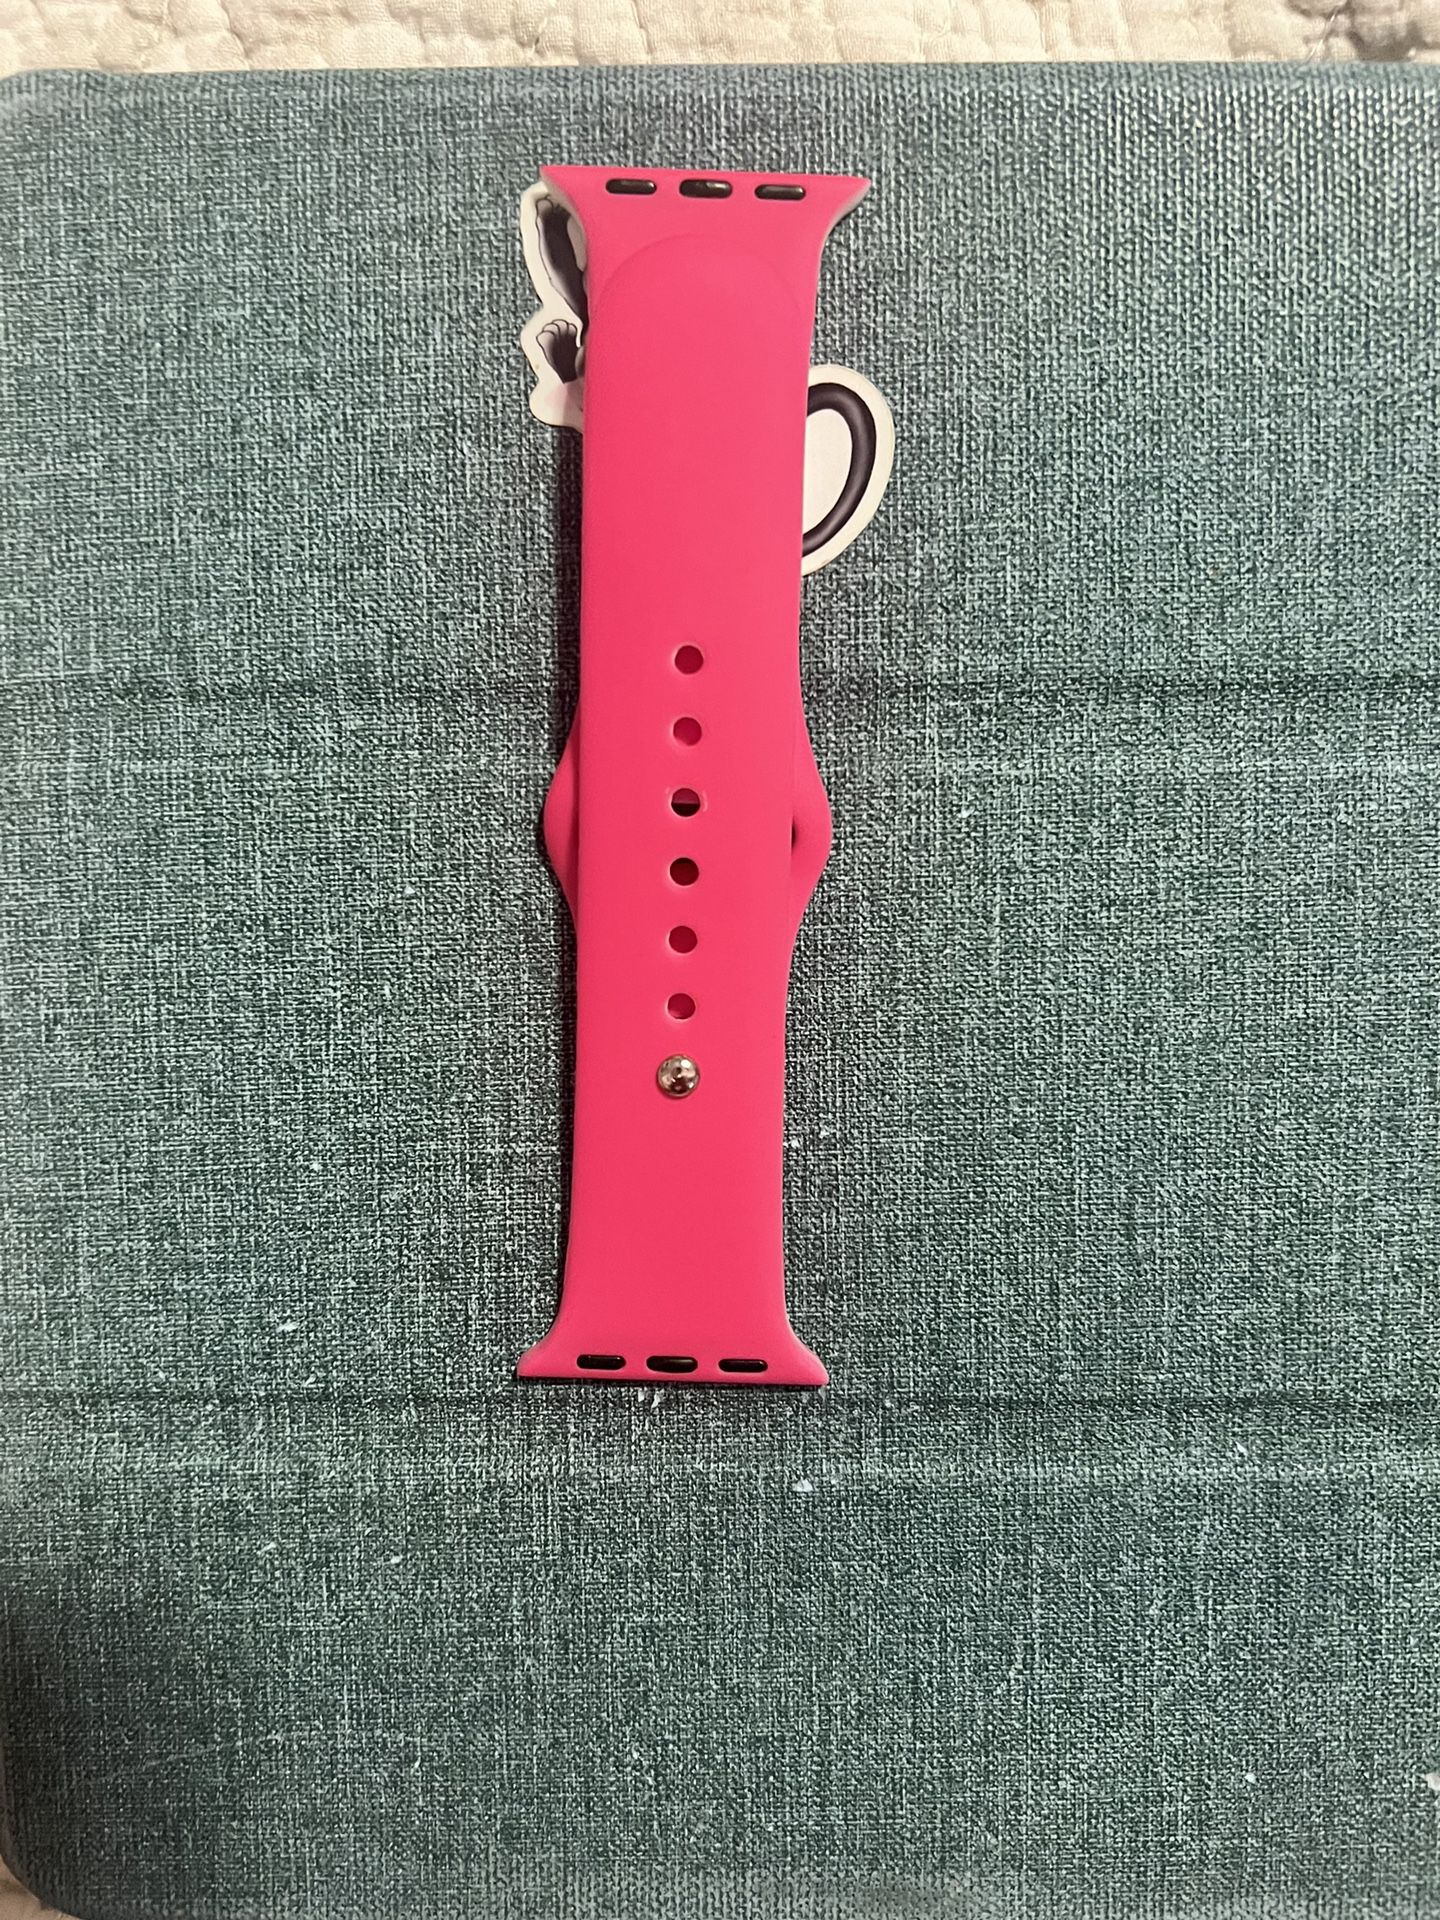 Apple Watch Band Series 7 41mm